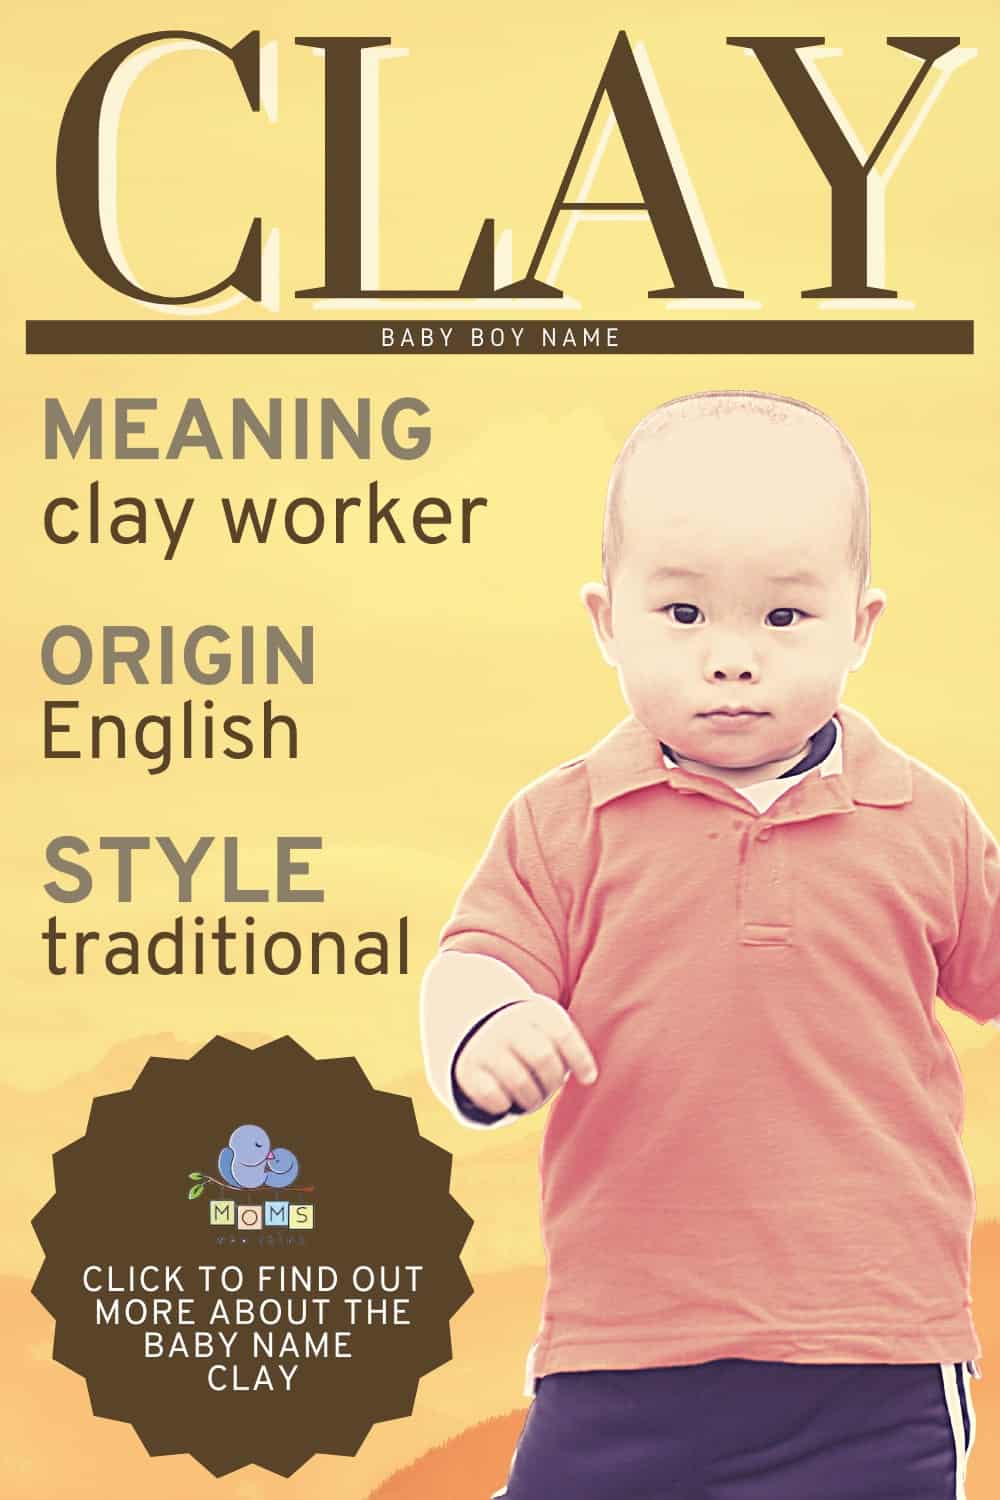 Baby name Clay